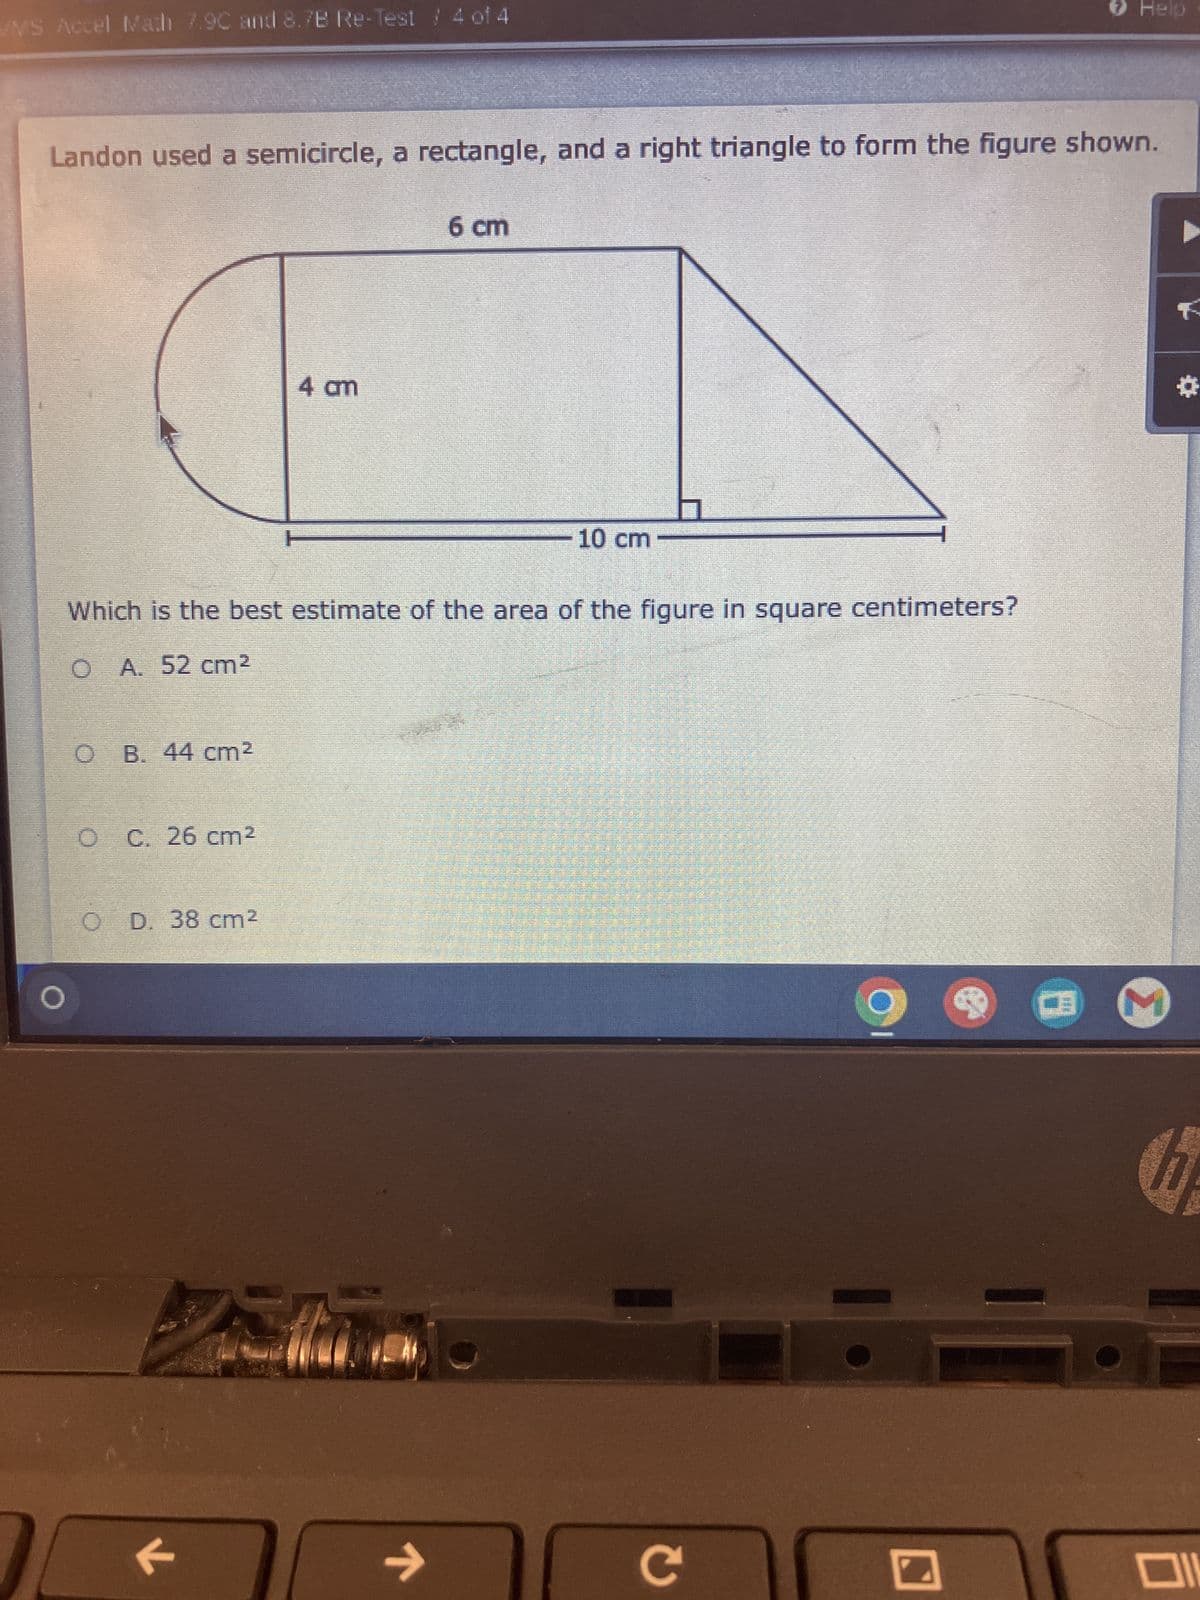 WMS Accel Math 7.90 and 8.7B Re-Test / 4 of 4
> Help
Landon used a semicircle, a rectangle, and a right triangle to form the figure shown.
6 cm
4 am
10 cm
Which is the best estimate of the area of the figure in square centimeters?
O A. 52 cm²
O B. 44 cm²
C. 26 cm²
O D. 38 cm²
K
لا
C
*
ום